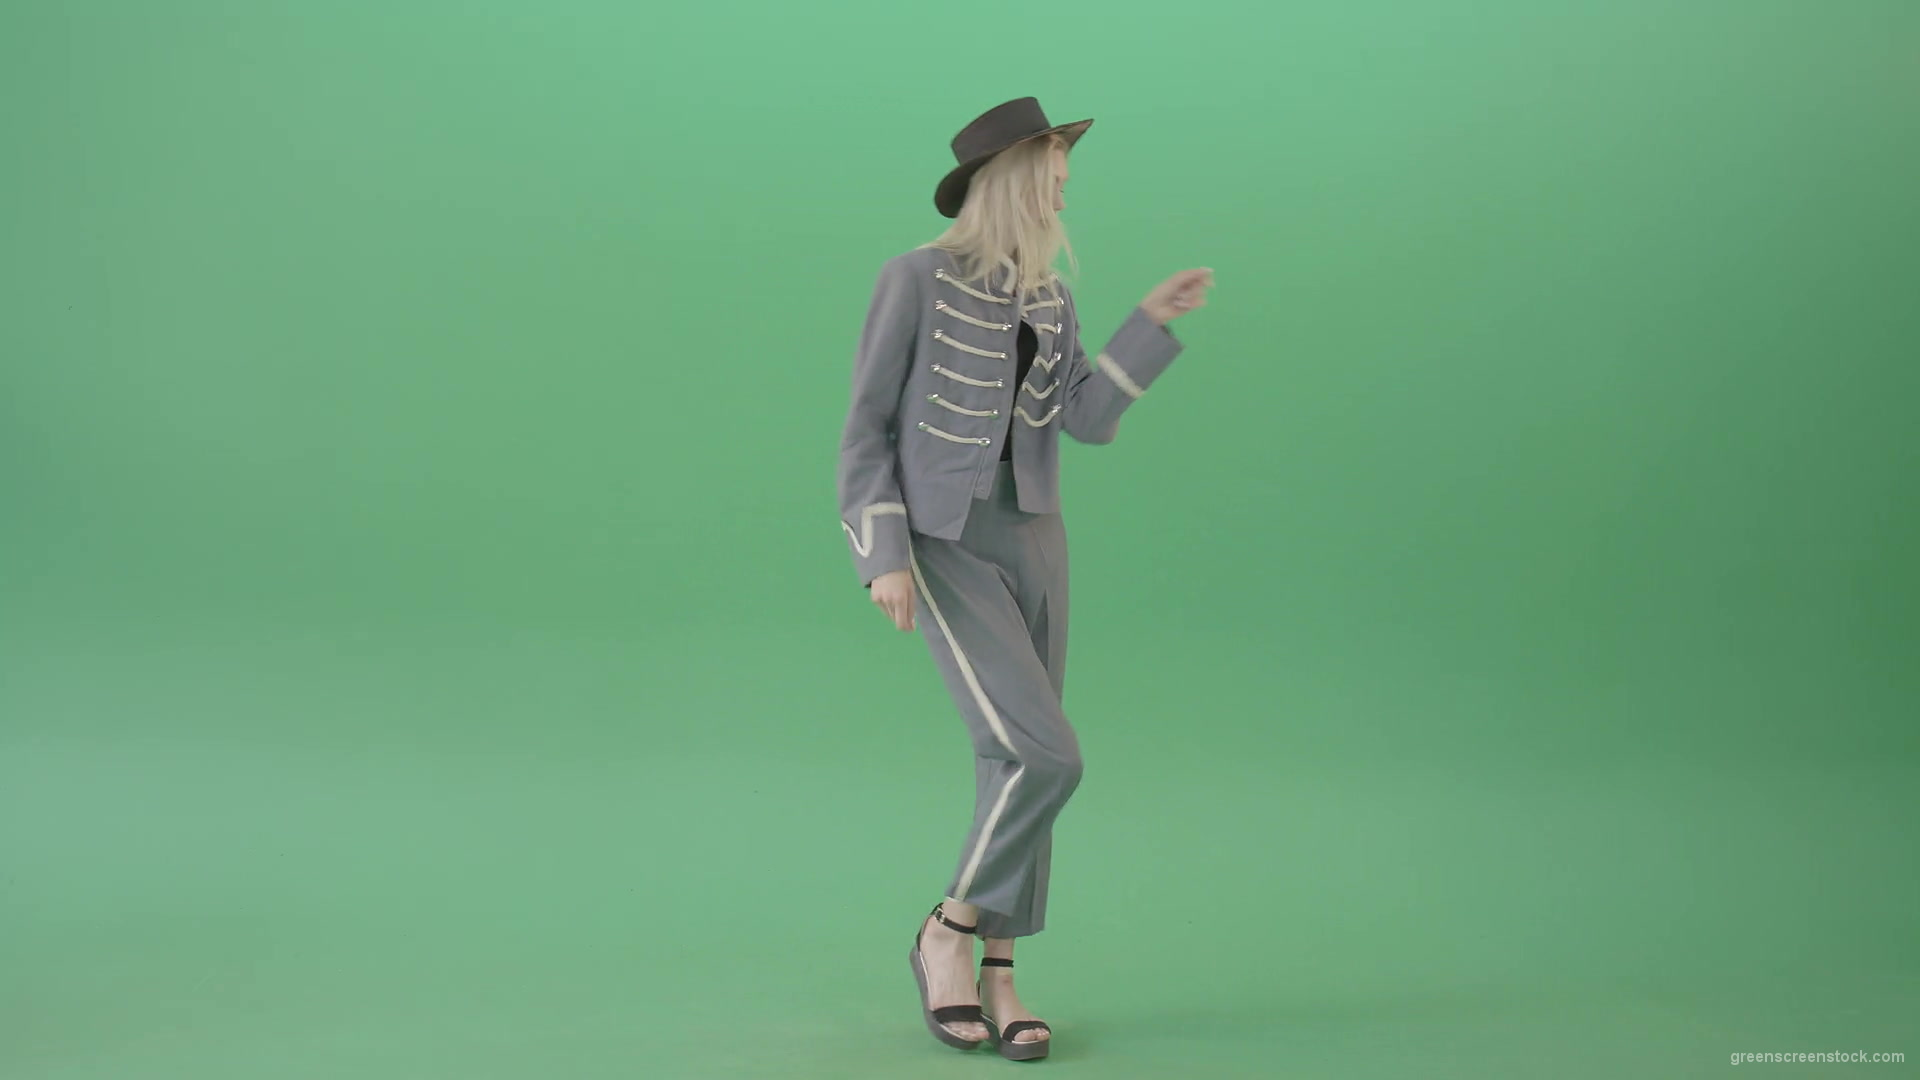 Blonde-Girl-in-Royal-dress-and-black-hat-dancing-house-and-chilling-in-green-screen-studio-4K-Video-Footage-1920_002 Green Screen Stock